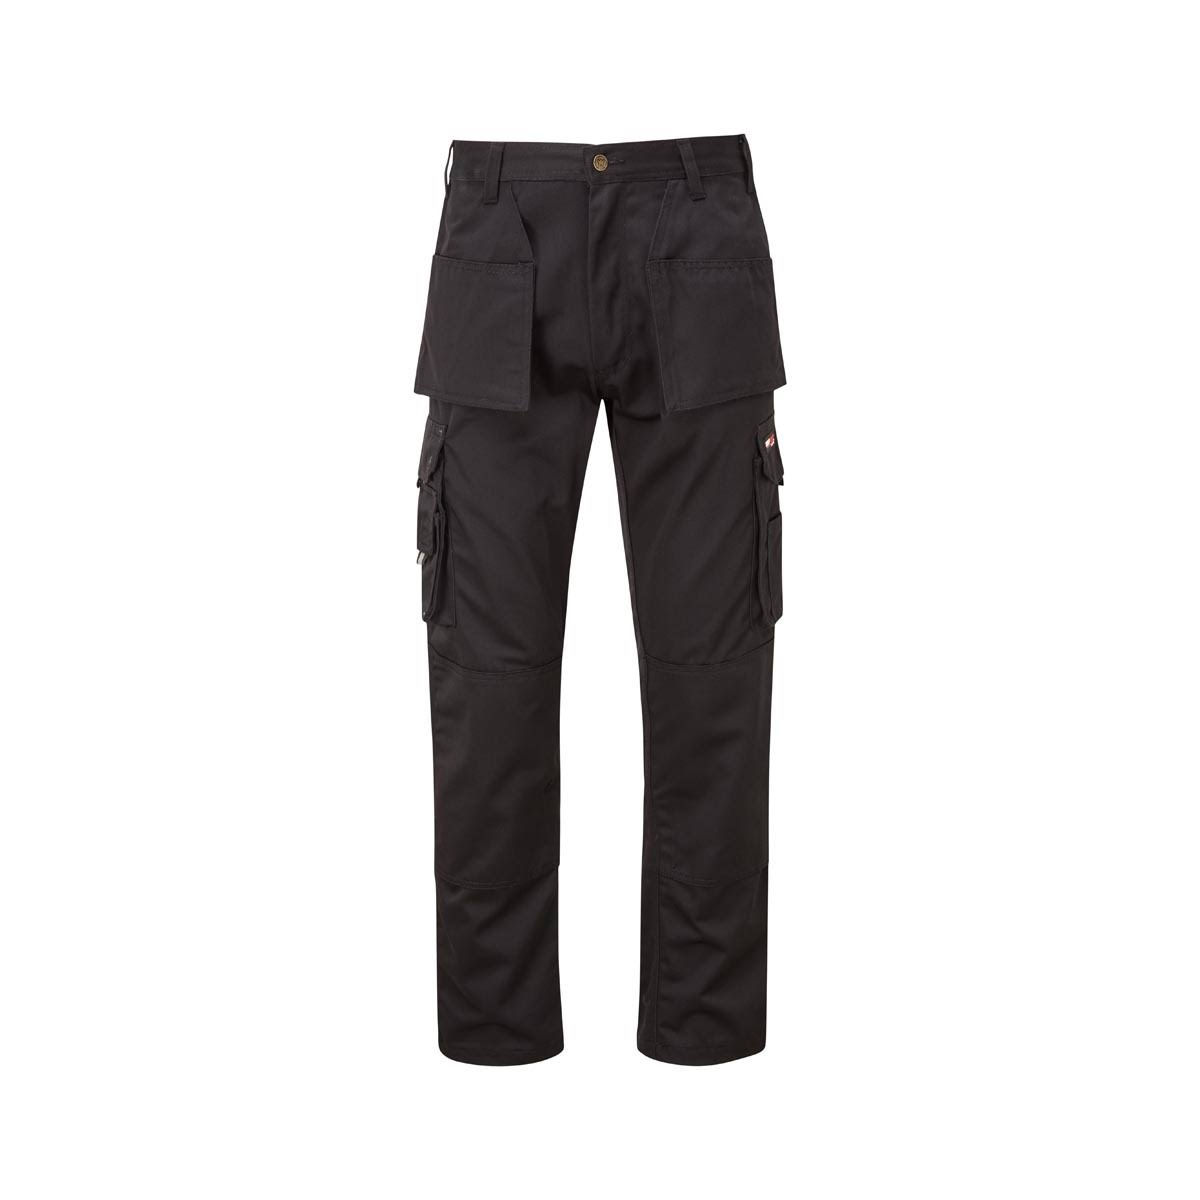 Tuffstuff 711-BLK-42R 711 Pro Work Trousers Black - 42R | By Toolden